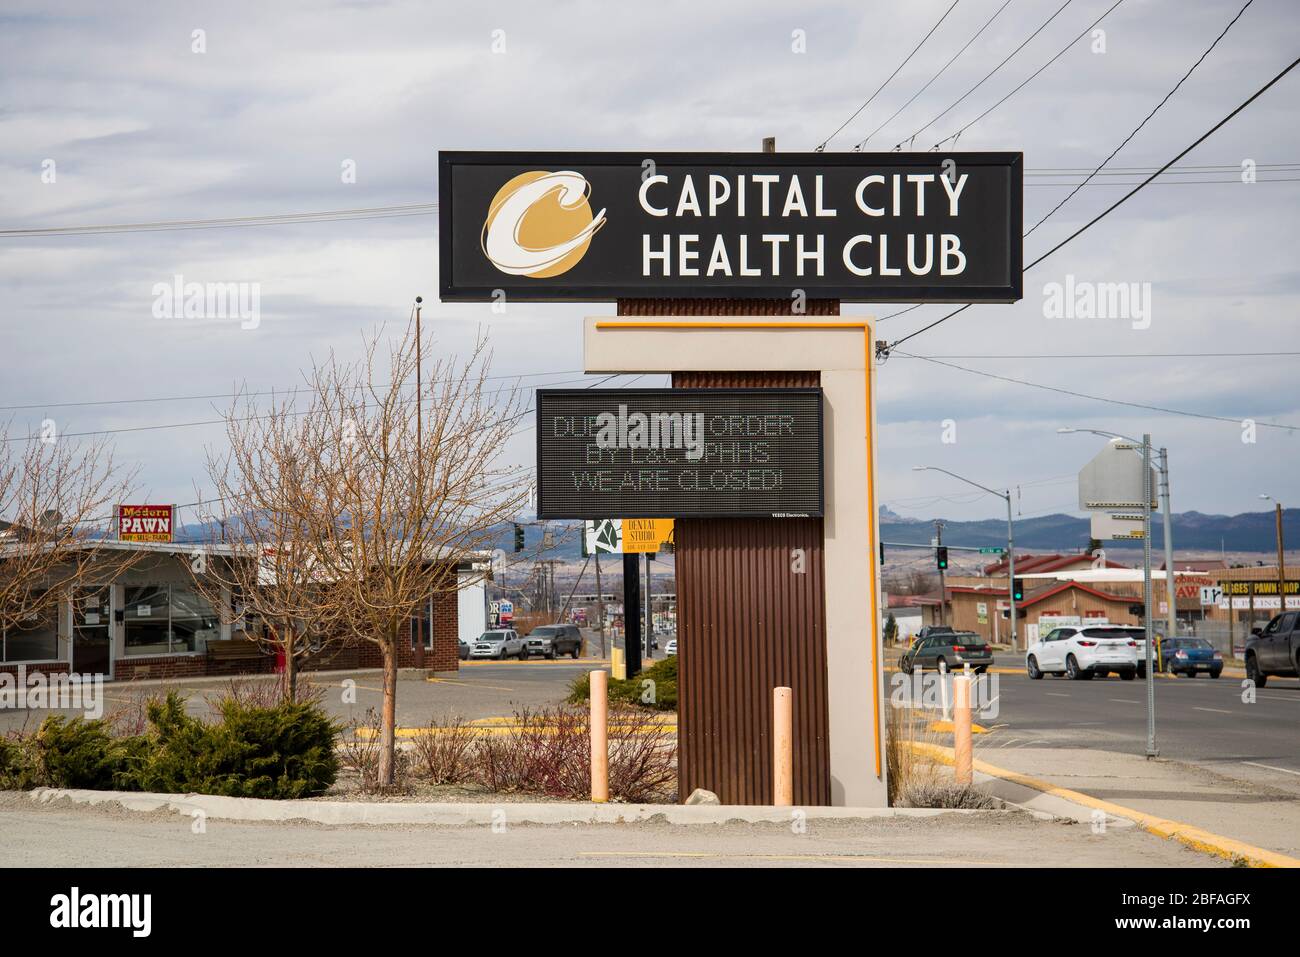 Helena, Montana - April 10, 2020: Capital City Health Club gym outdoor digital sign states Closed due to Lewis and Clark Public Health Department orde Stock Photo